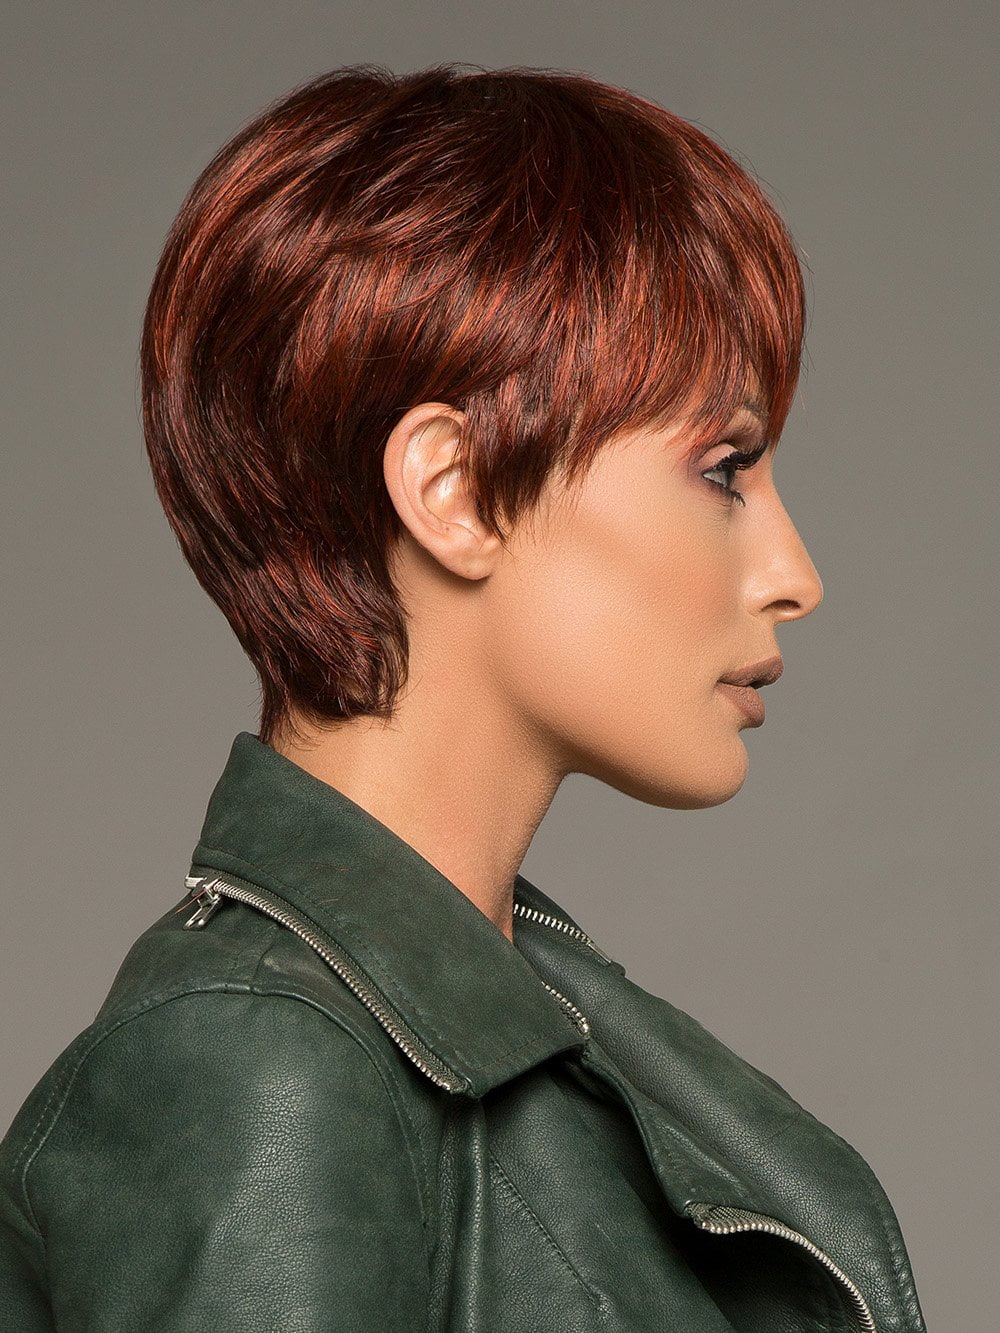 Layers on the top and sides are longer and texturized to create a light, feathered look. Use a styling creme to amplify the layers